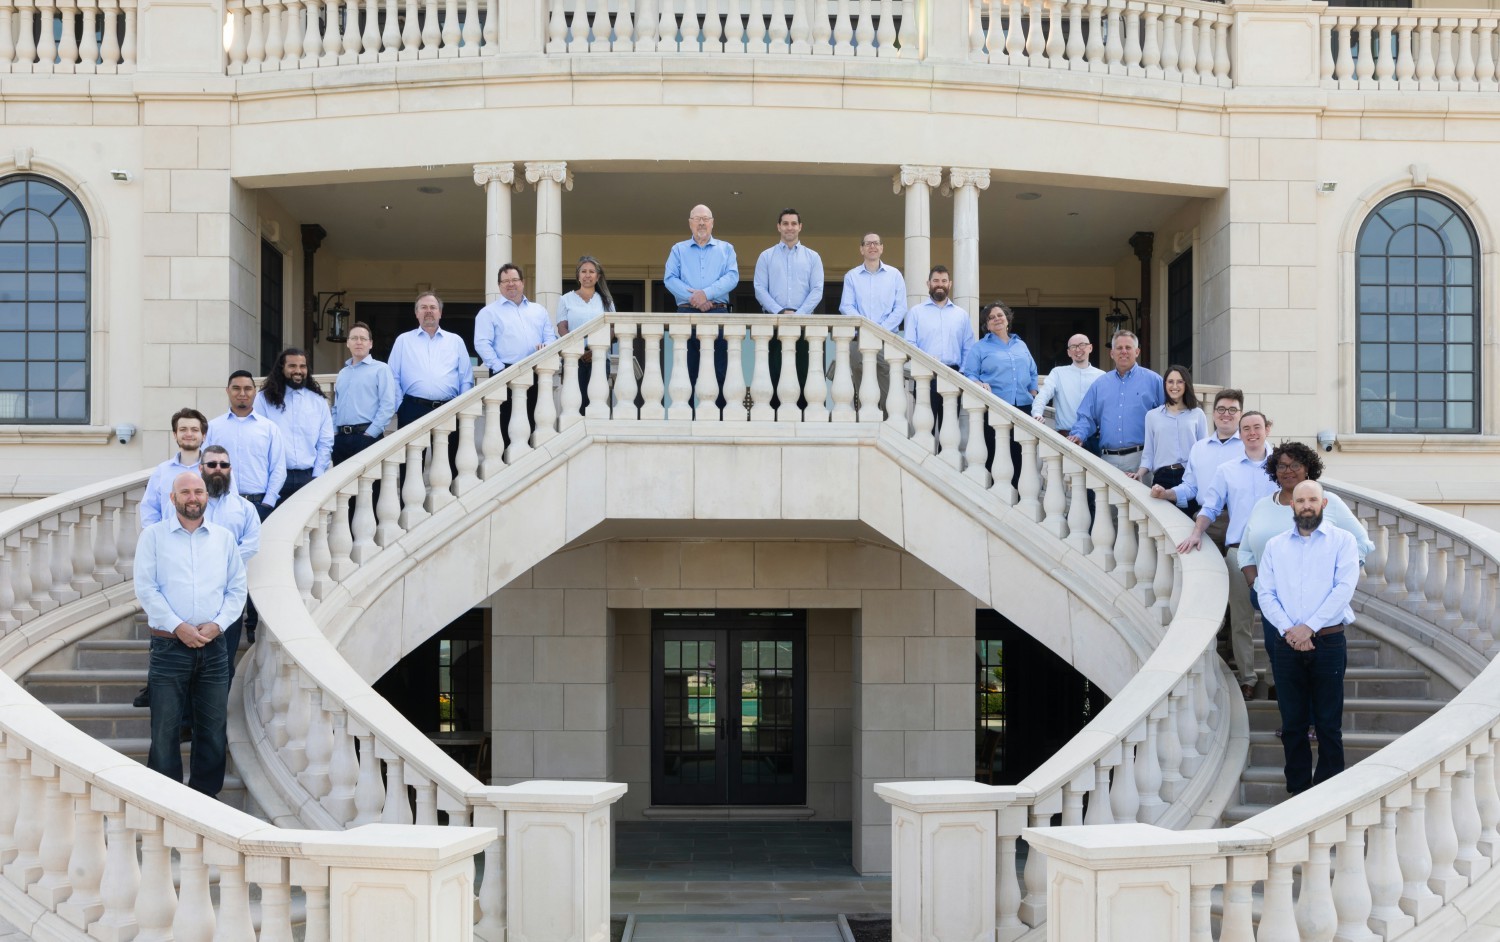 Group shot of the team at the home of one of our terrific clients!  